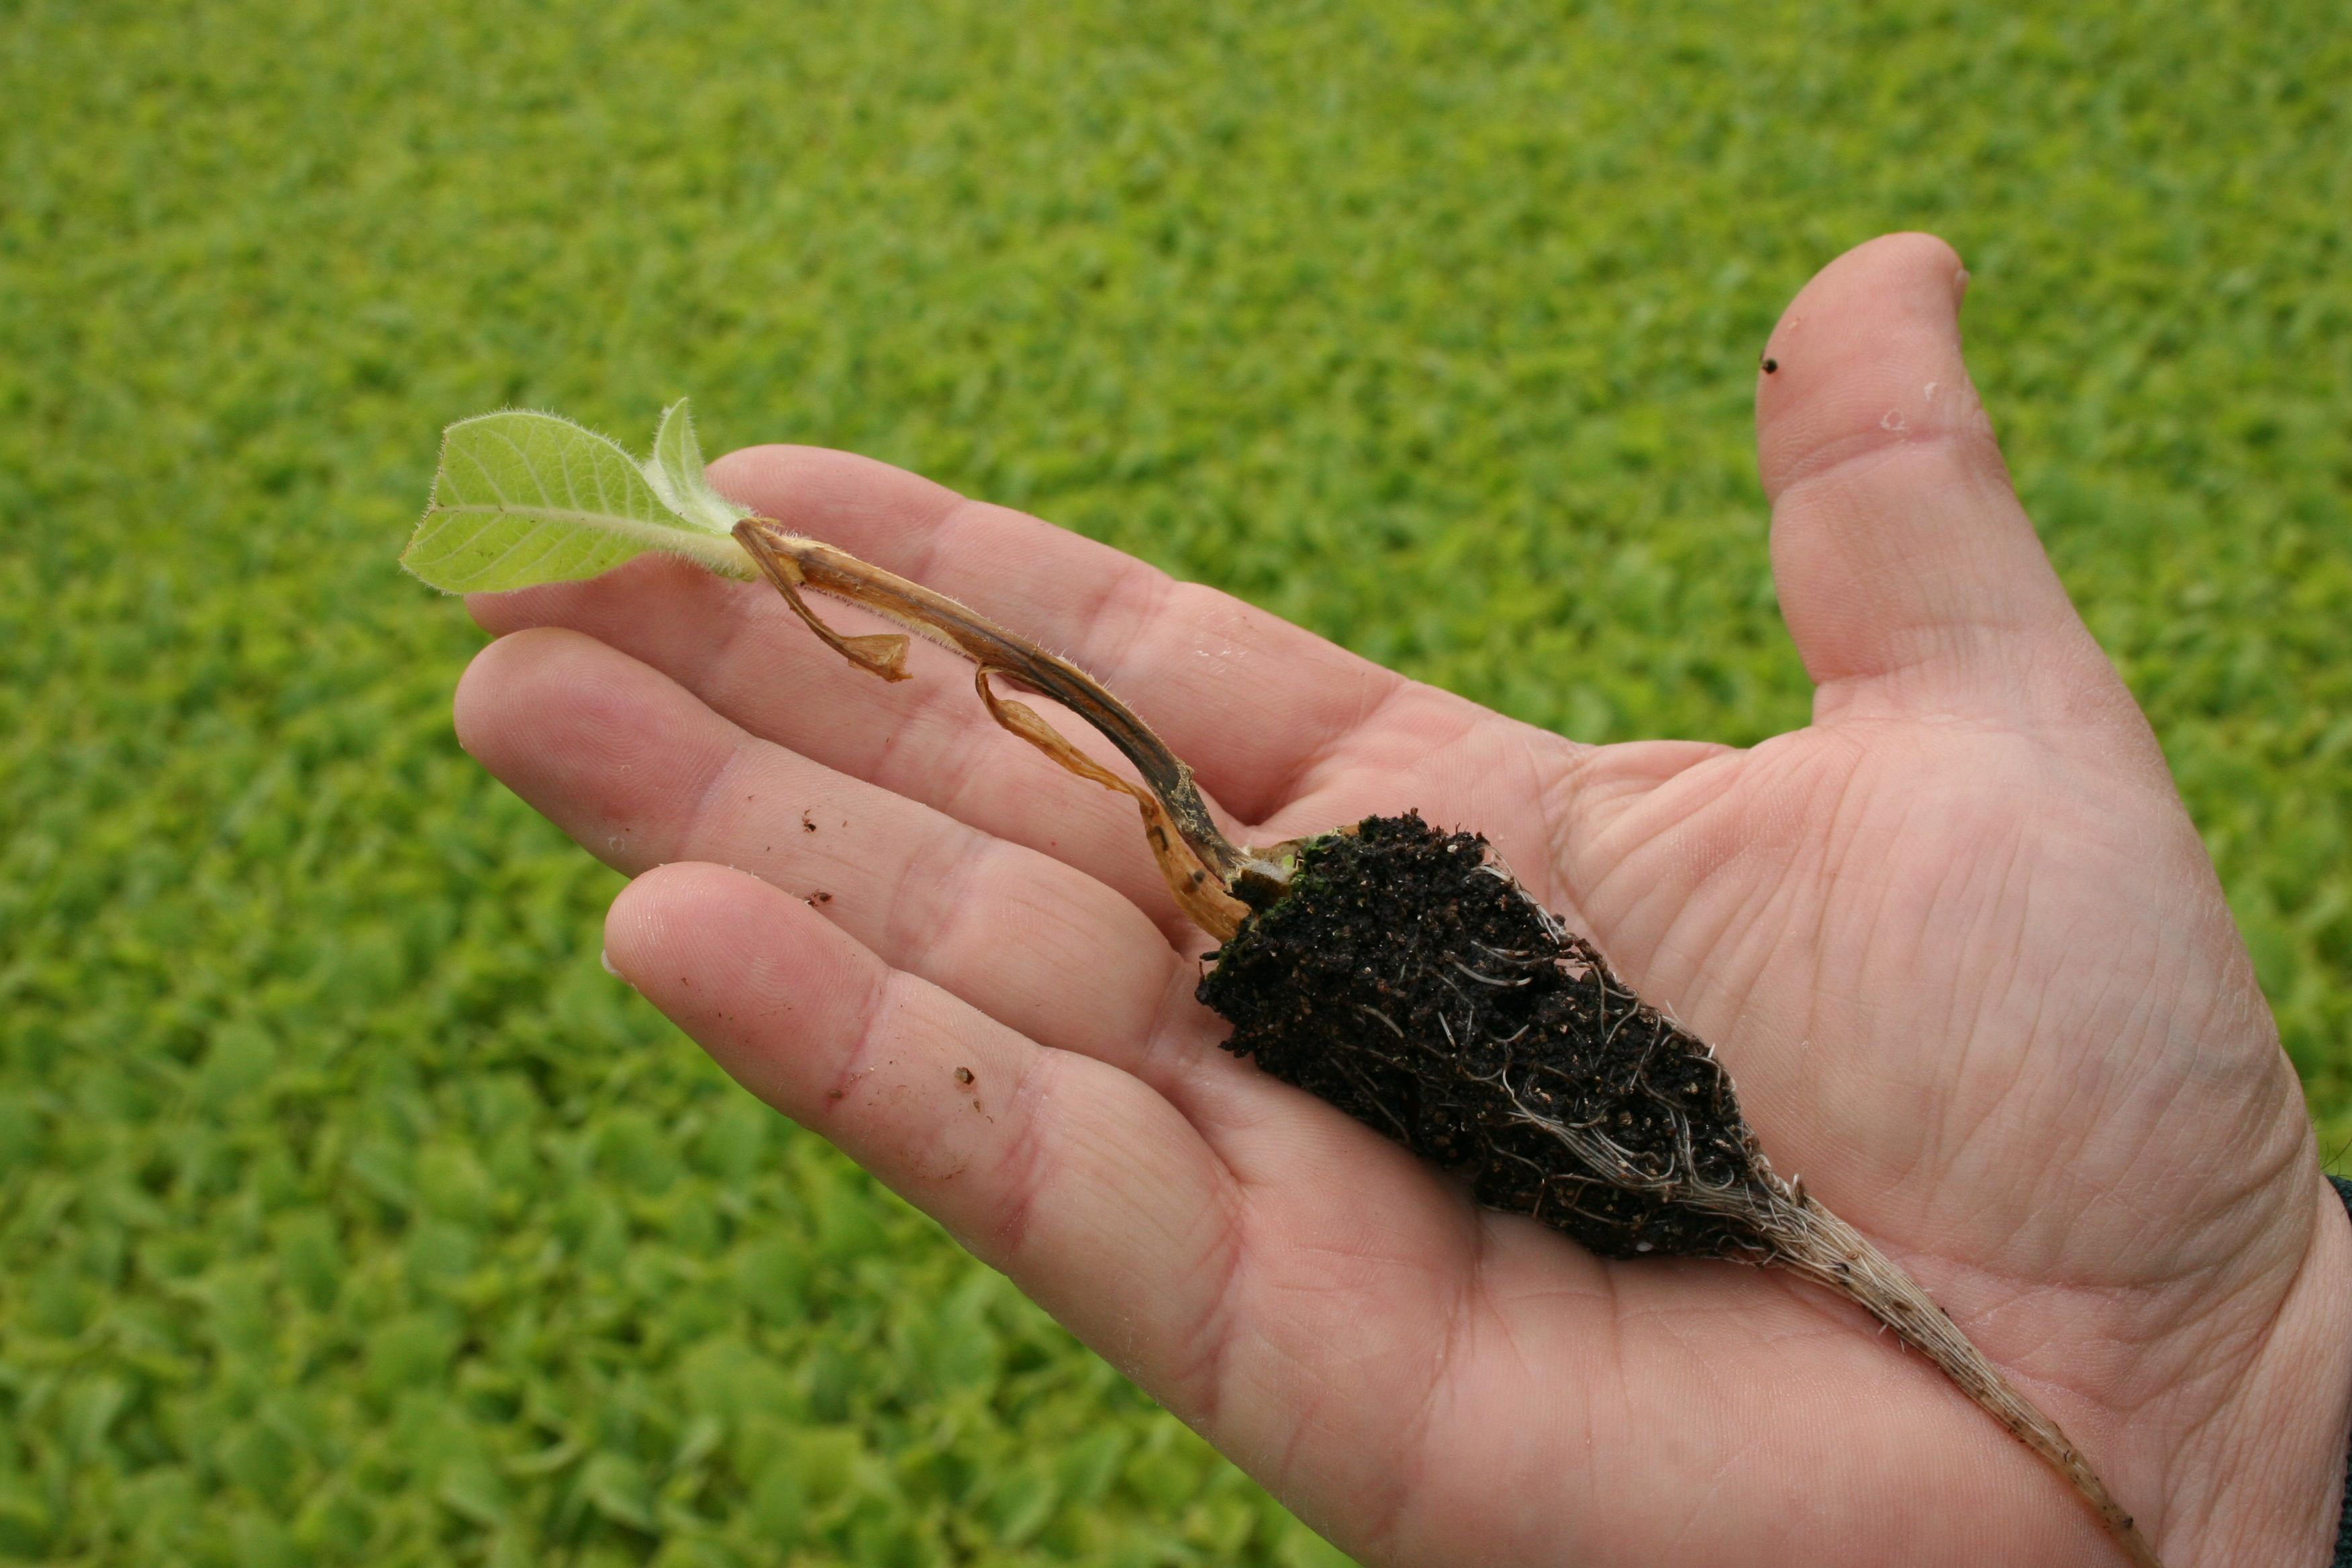 Blackened, water-soaked lesions on lower stems of affected plants are typical of the later stage of blackleg. (Photo: Kenneth Seebold, UK)